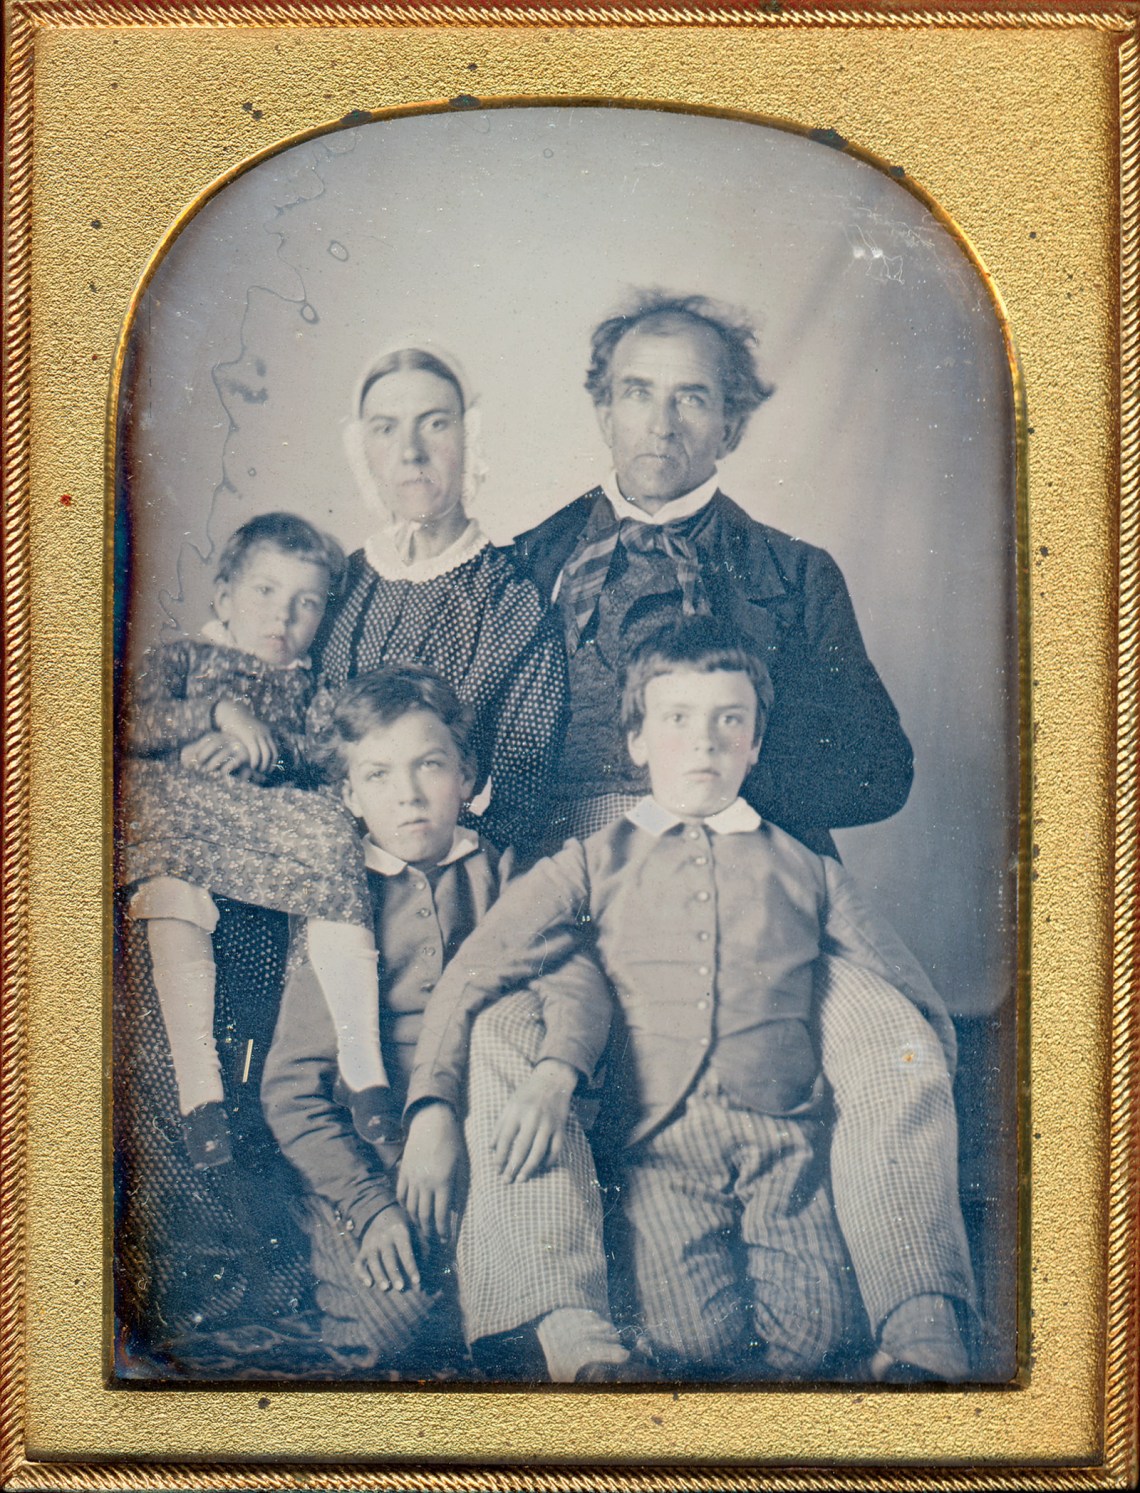 Angelina Grimke Weld and Theodore Dwight Weld with their children Sarah, Theodore, and Charles Stuart